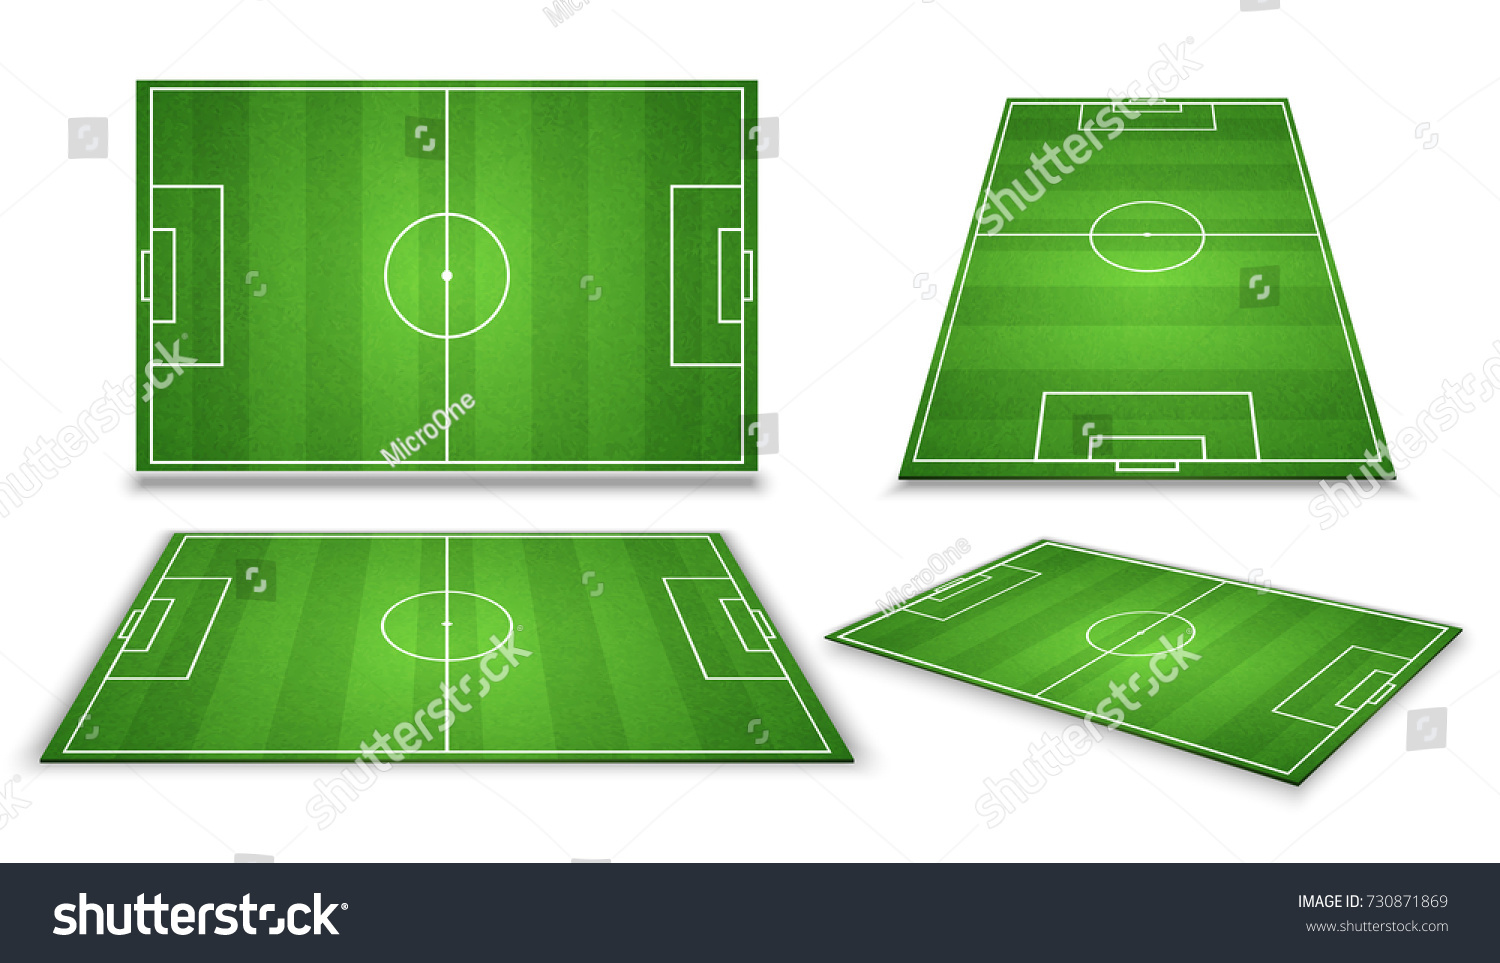 Soccer, european football field in different point of perspective view. Isolated vector illustration. Soccer green field for game